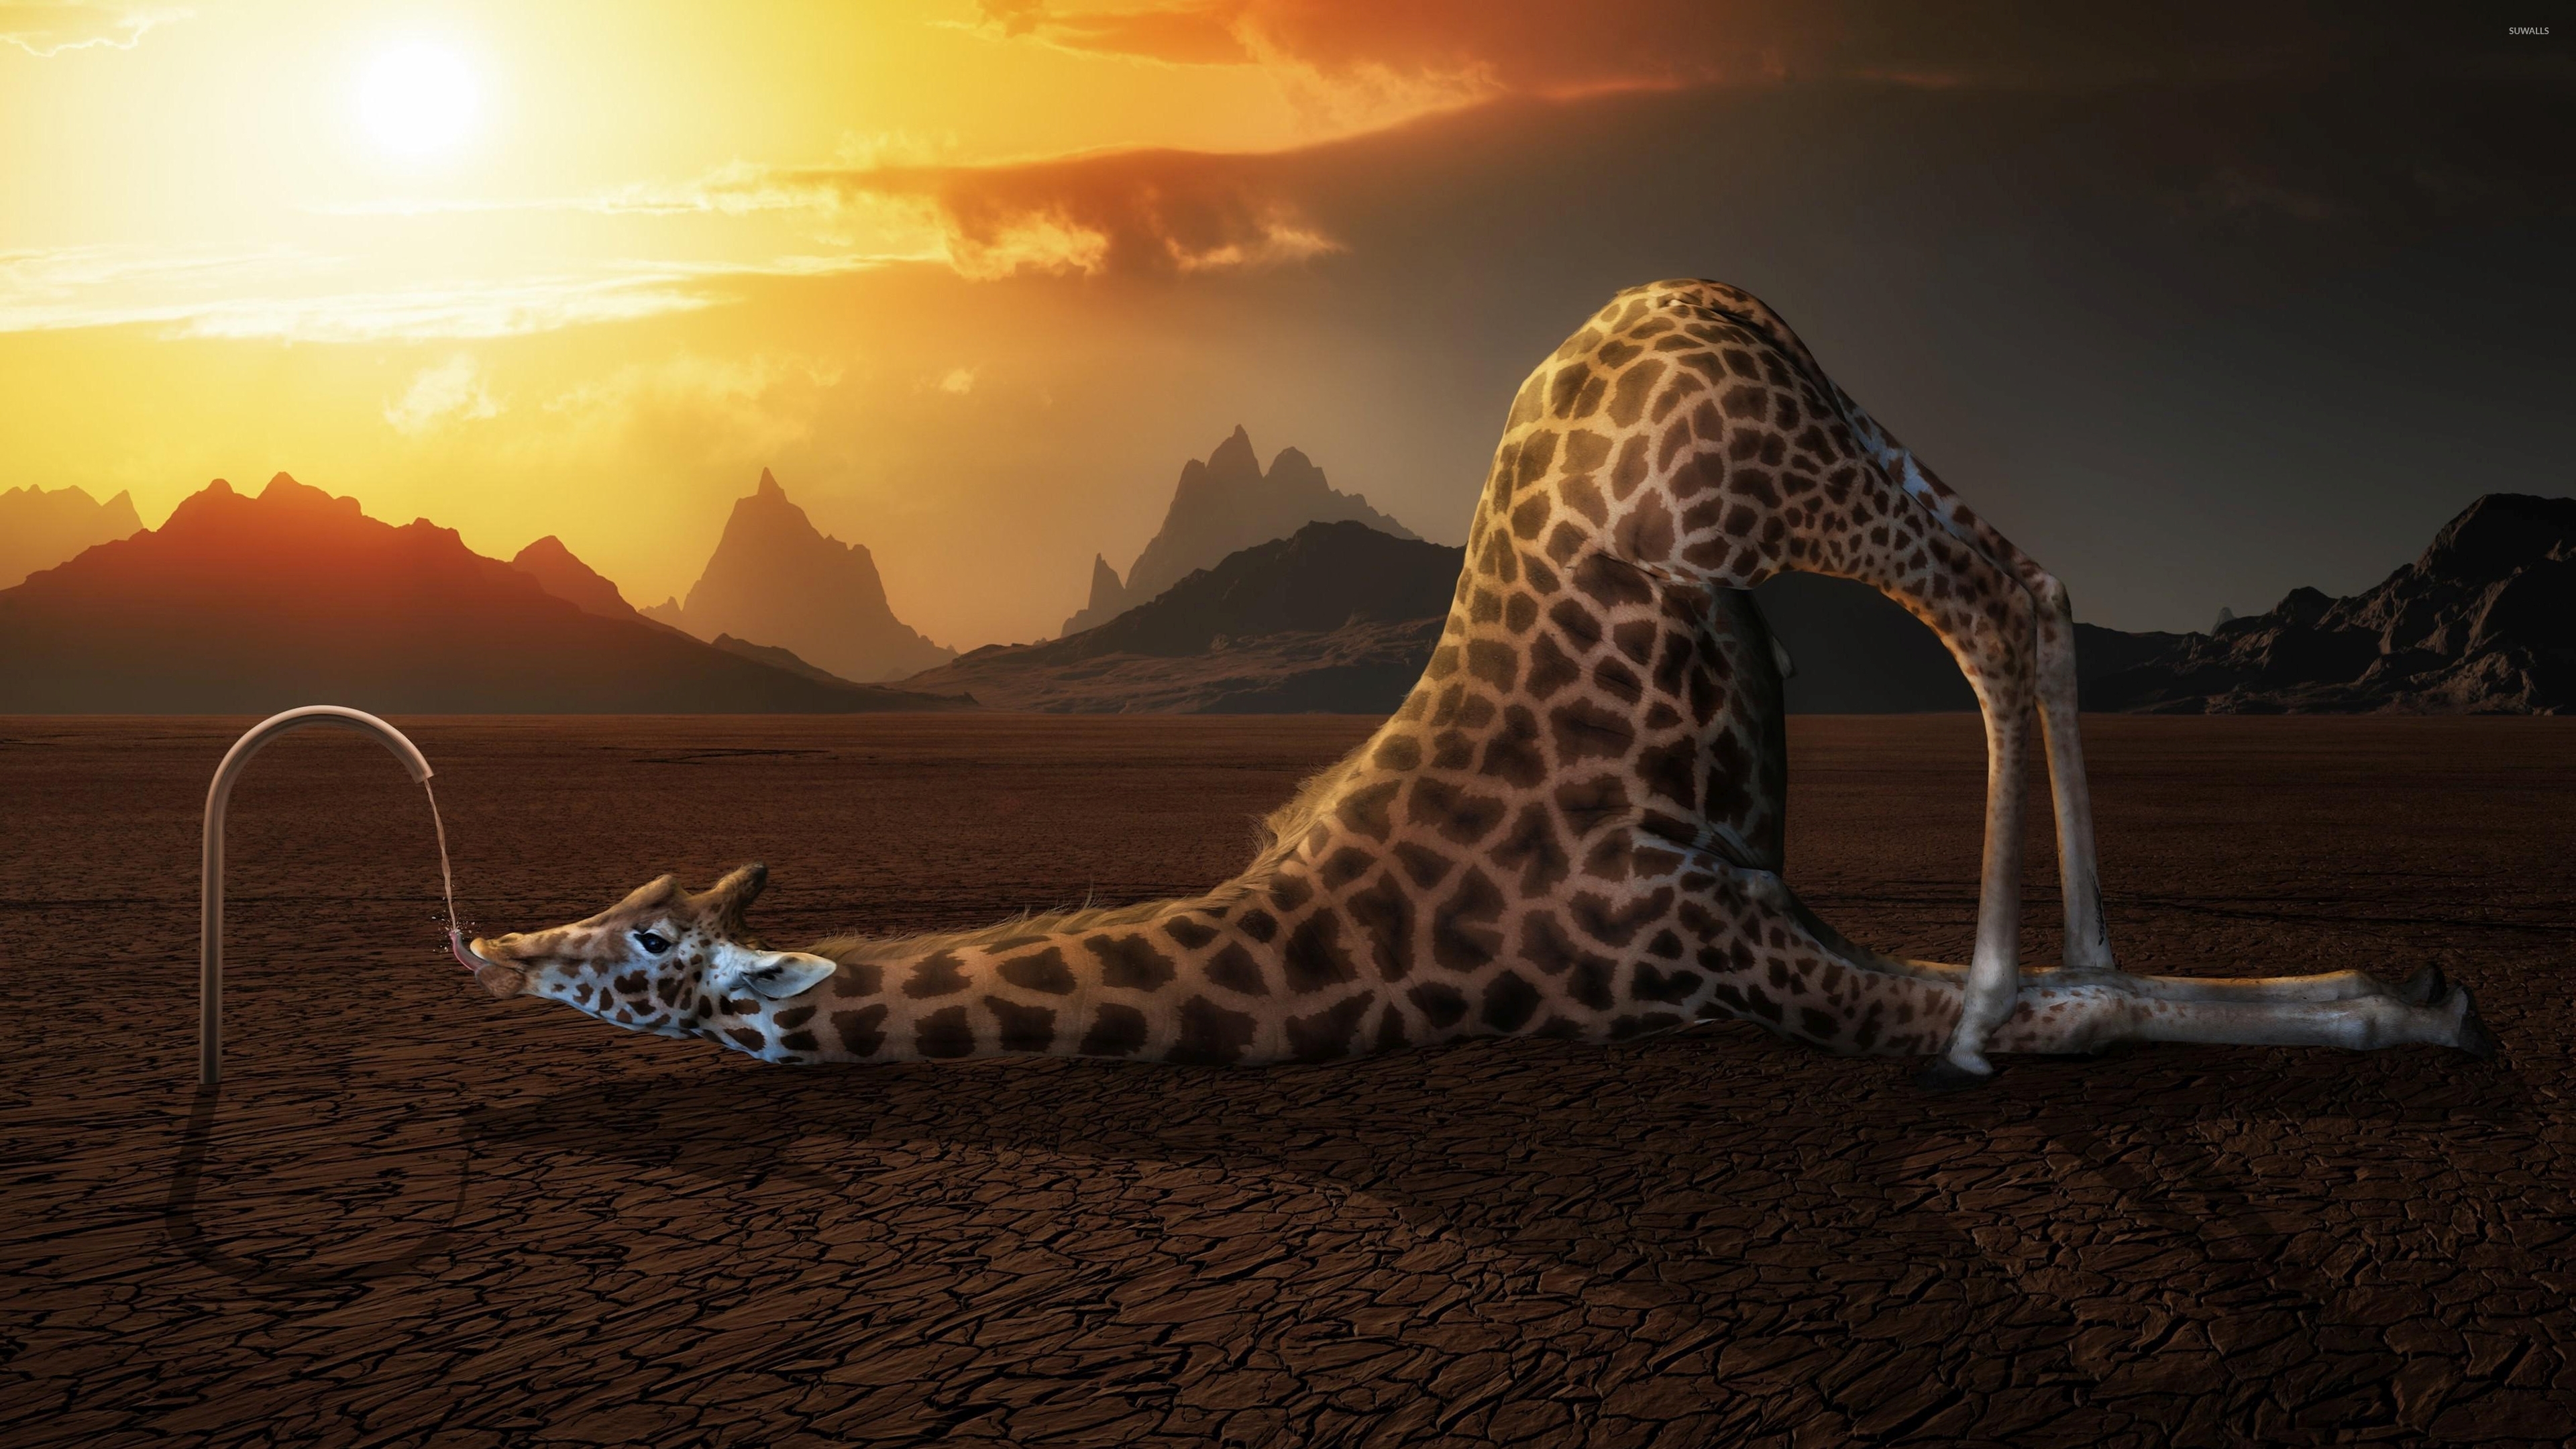 Funny Giraffe Pictures wallpapers 46 Wallpapers \u2013 HD Wallpapers